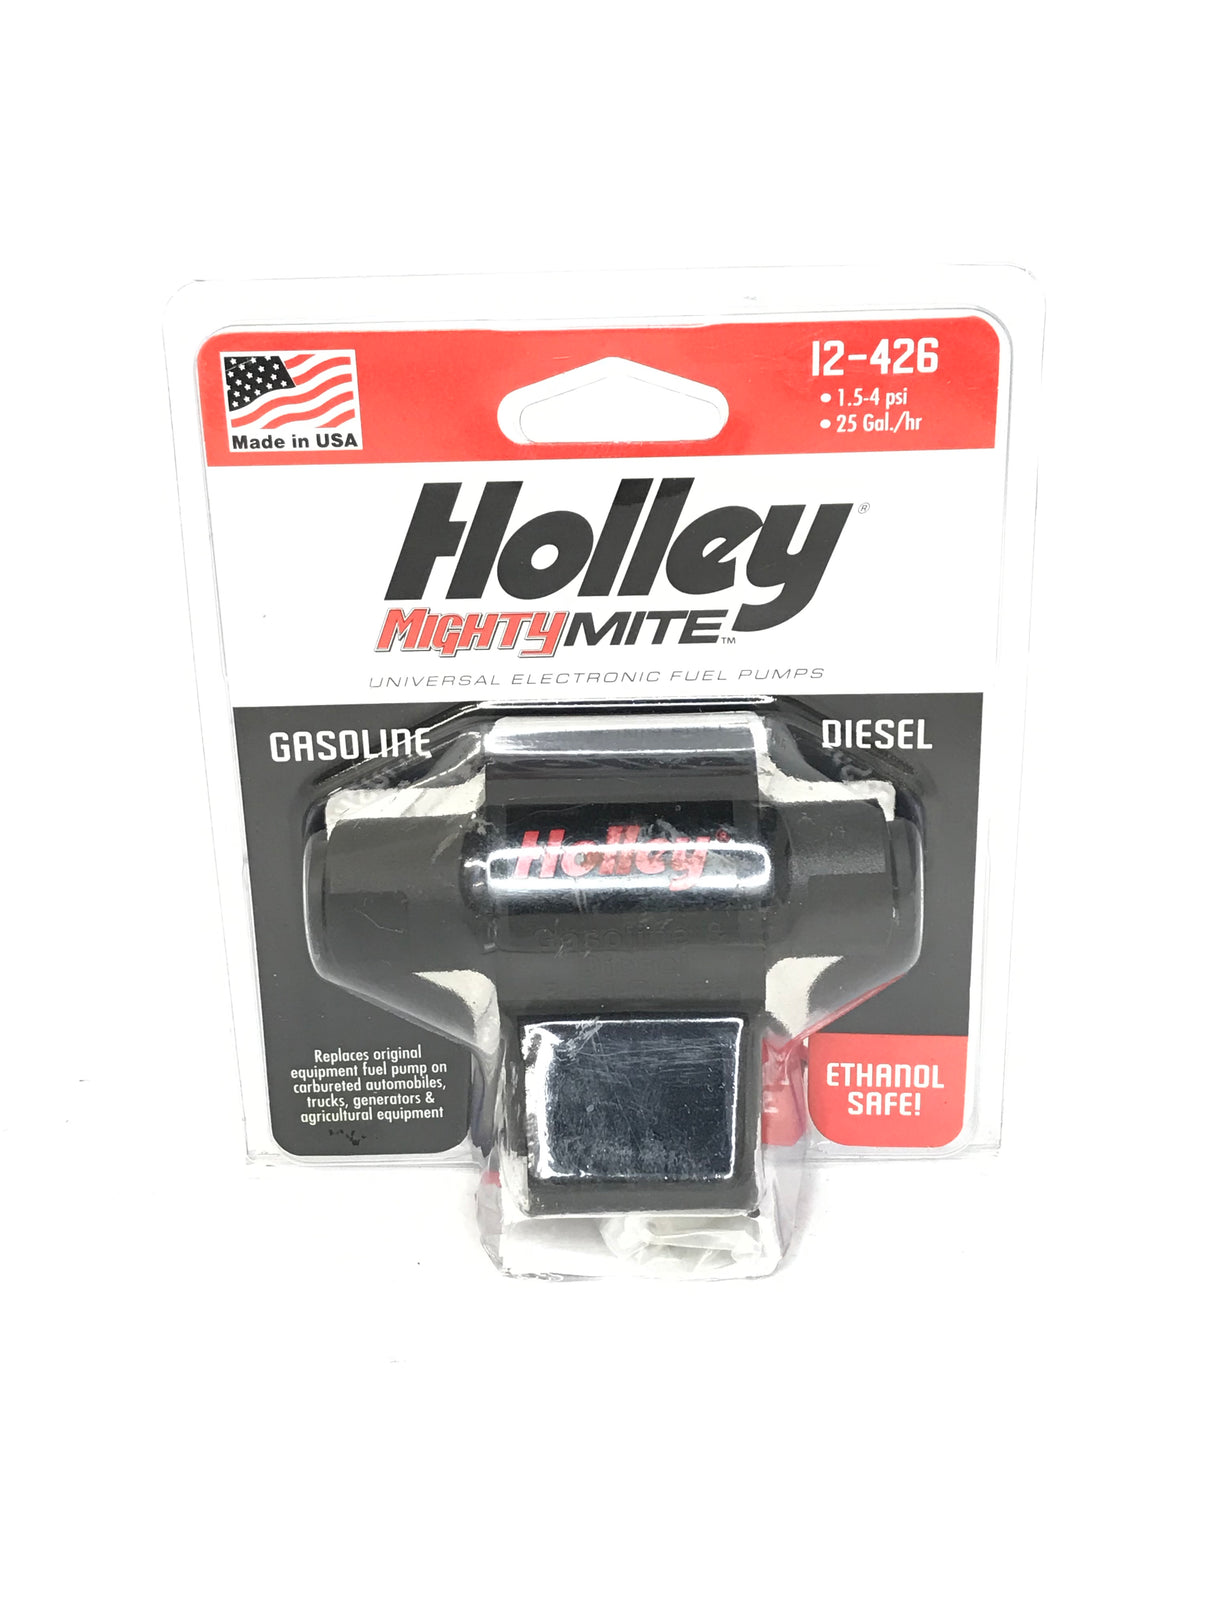 Holley 12-426 25 GPH MIGHTY MITE ELECTRIC FUEL PUMP, 1.5-4 PSI